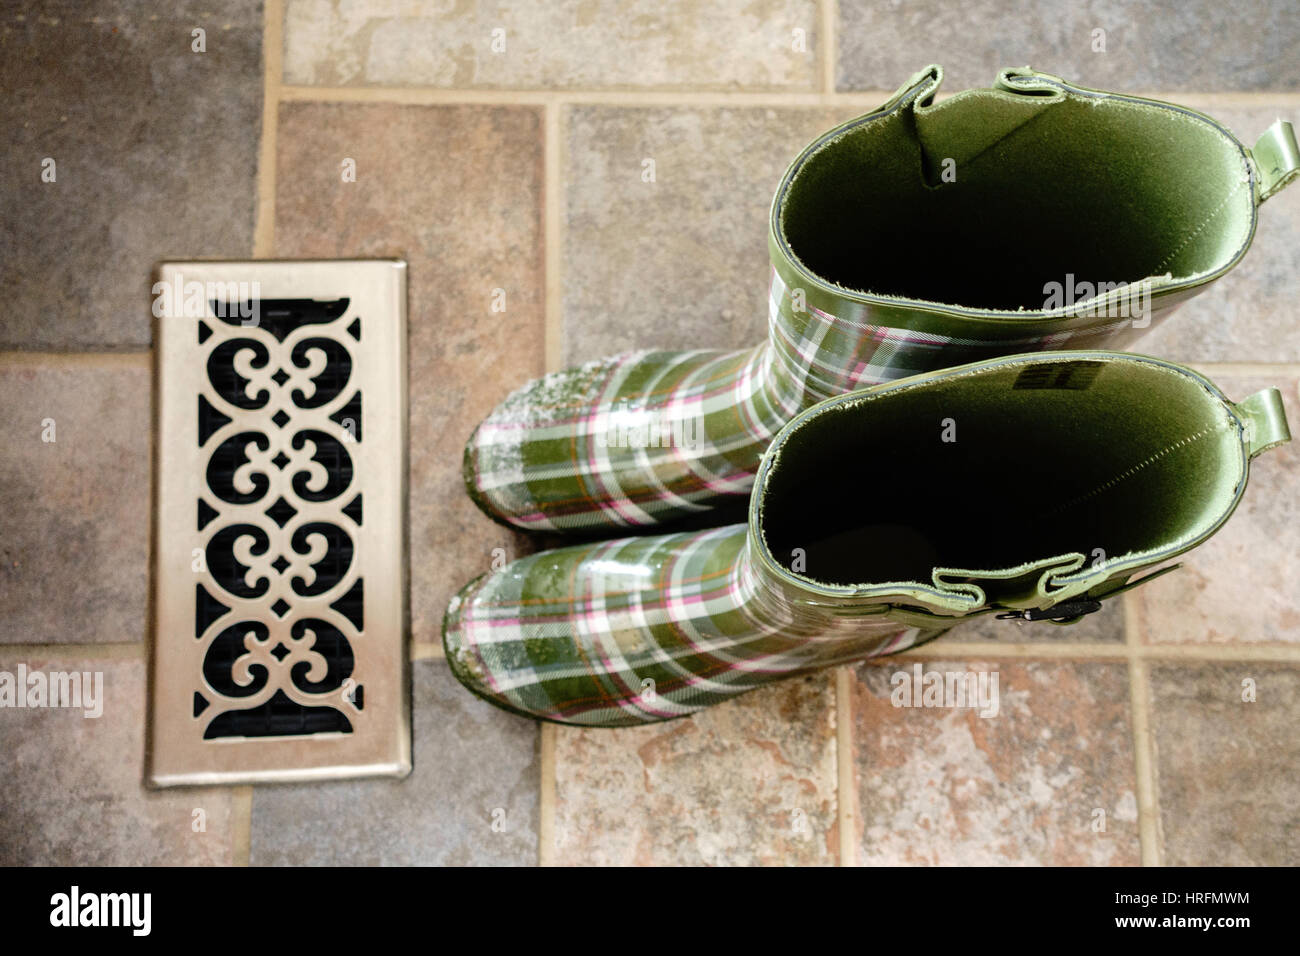 Patterned green women's rubber boots, or Wellies, with snow on the toes warming up at a floor vent indoors. Stock Photo